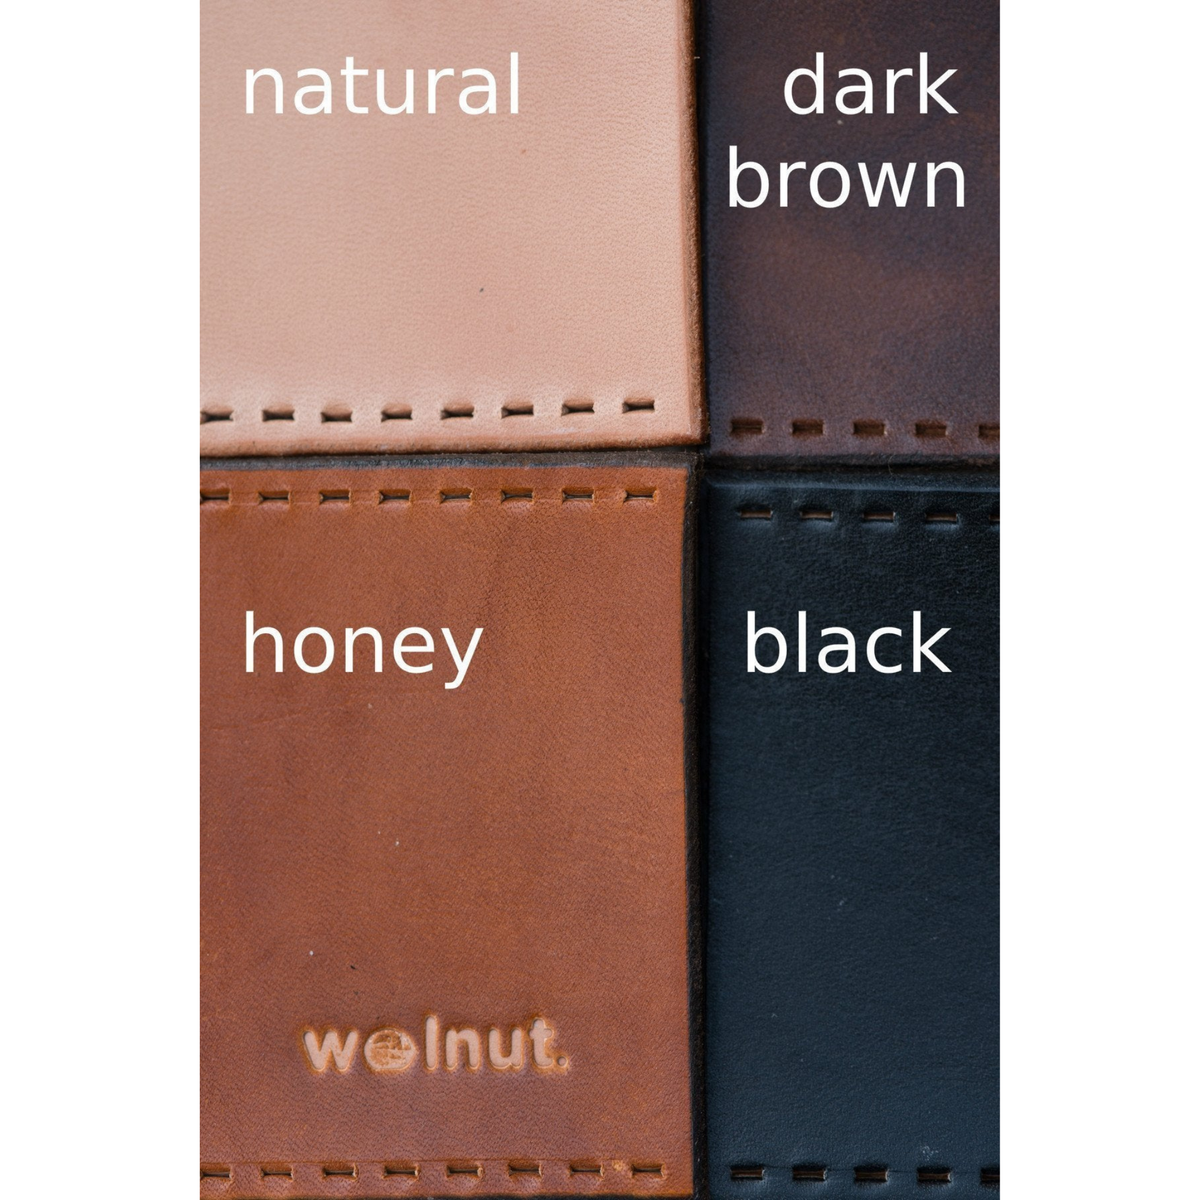 Leather color swatch in natural outdoor light showing all four colors: Natural Undyed, Honey, Dark Brown, and Black vegetable-tanned leather hand-dyed